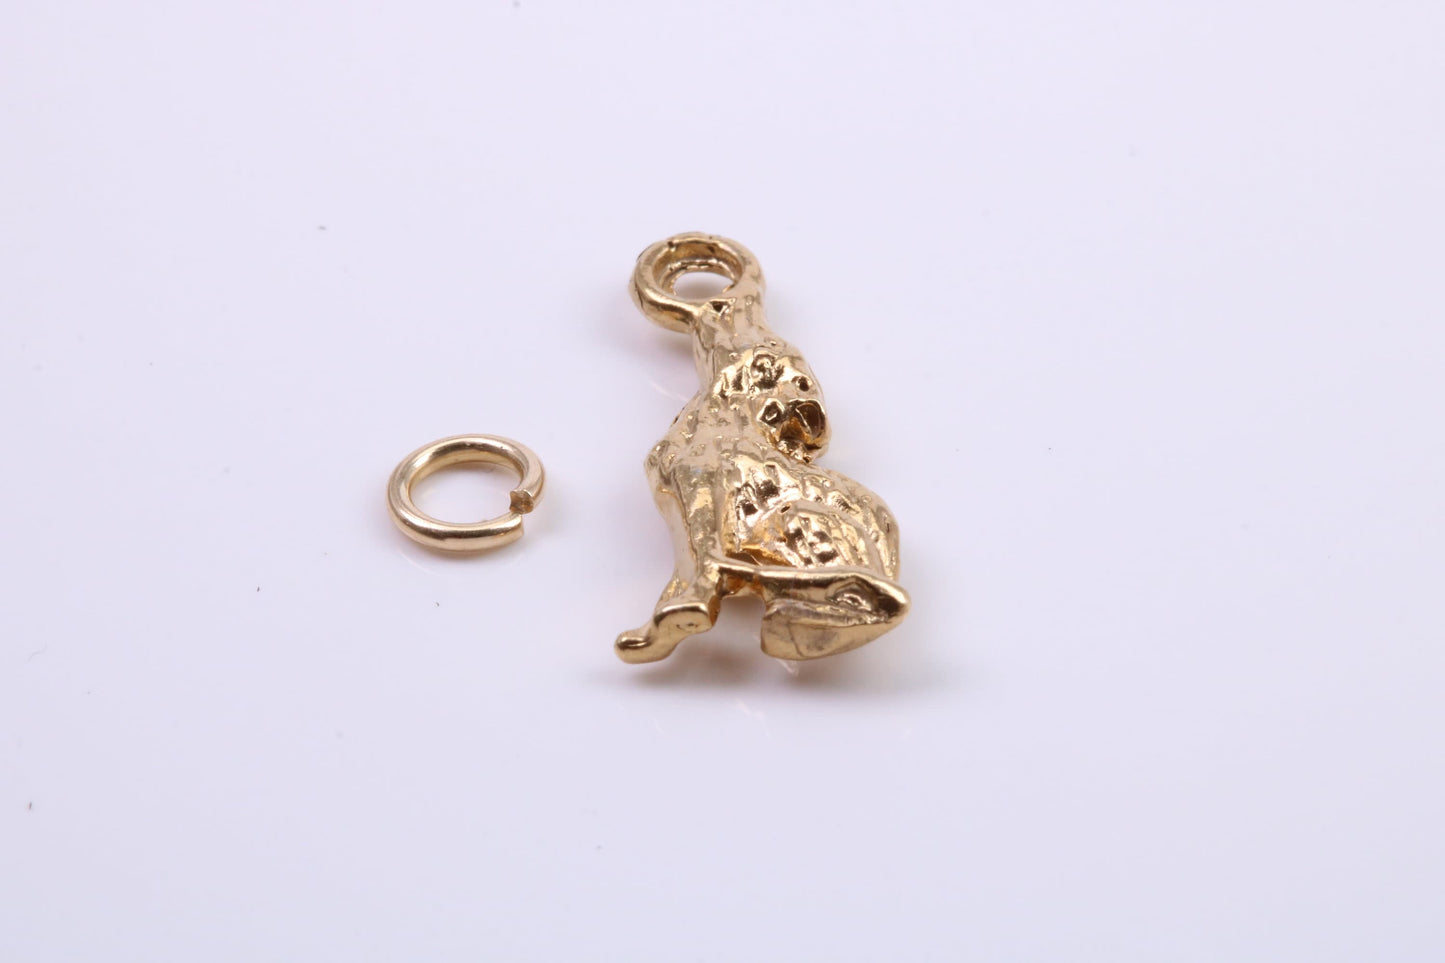 Wolf Charm, Traditional Charm, Made from Solid 9ct Yellow Gold, British Hallmarked, Complete with Attachment Link